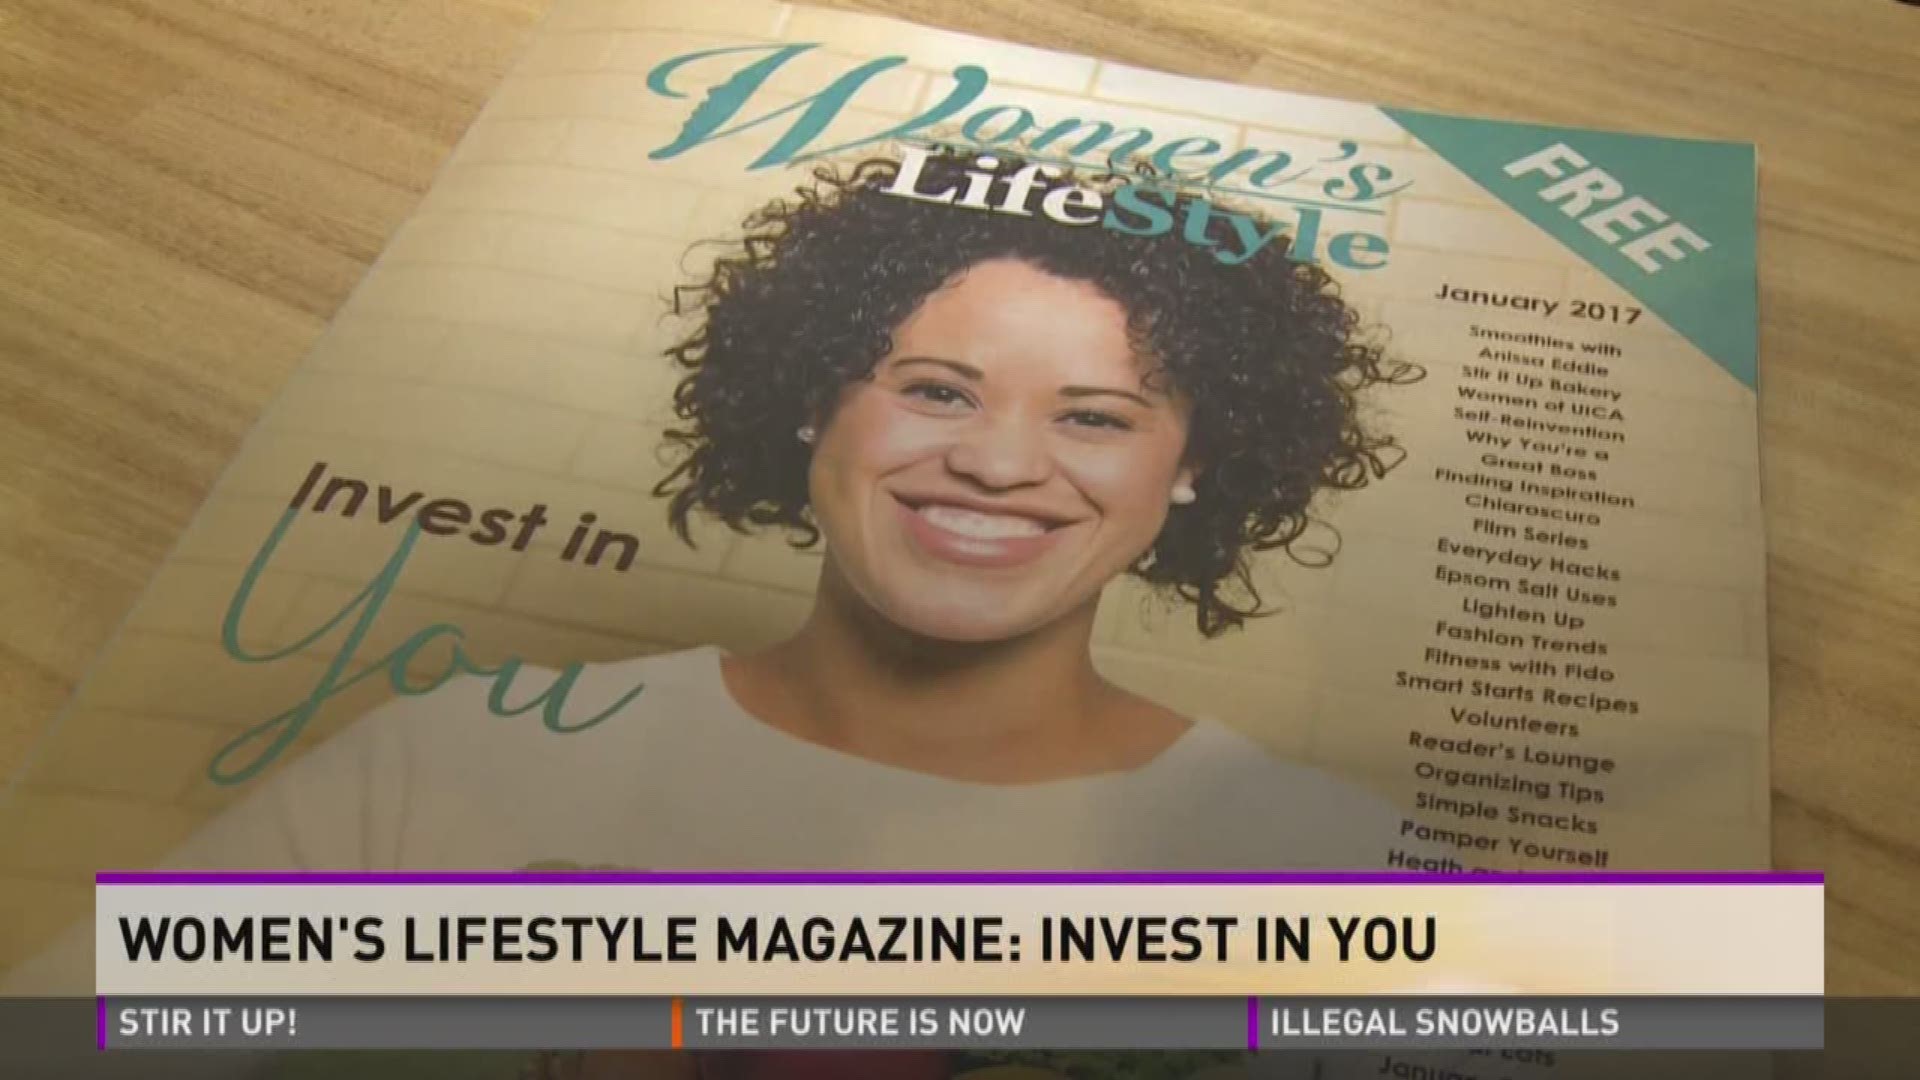 Women's Lifestyle Magazine: Invest in You